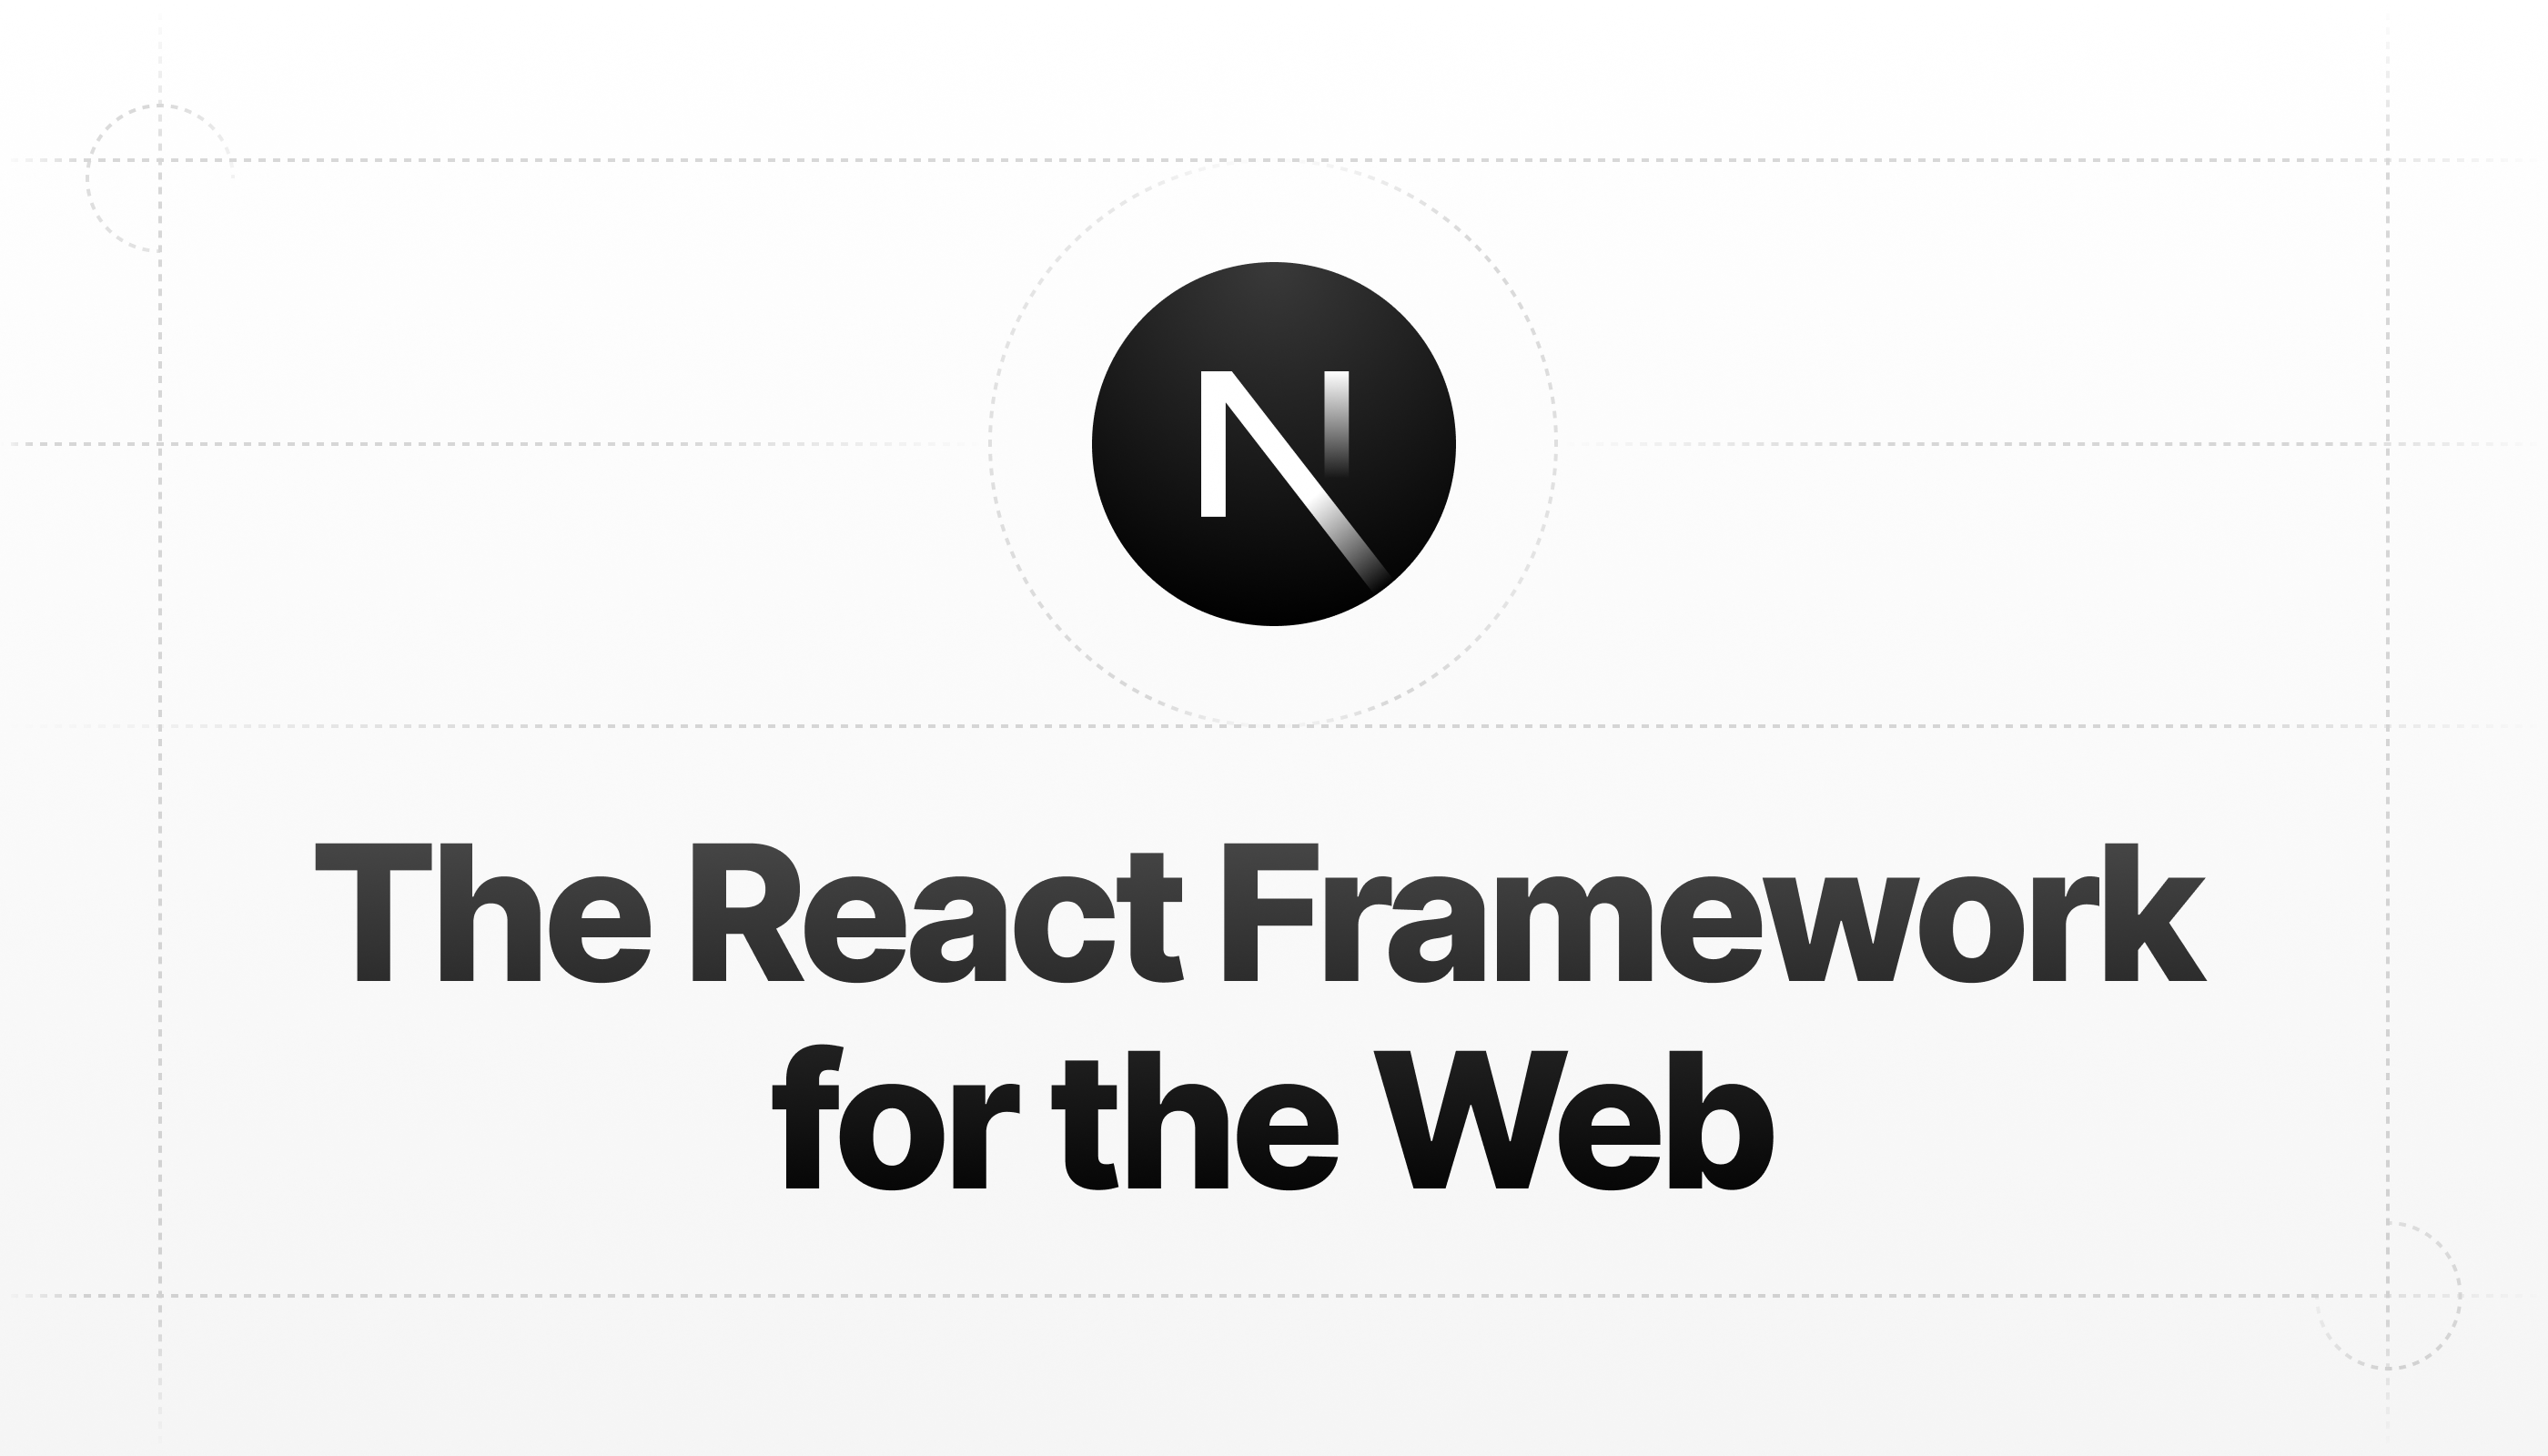 Next.js by Vercel - The React Framework for the Web